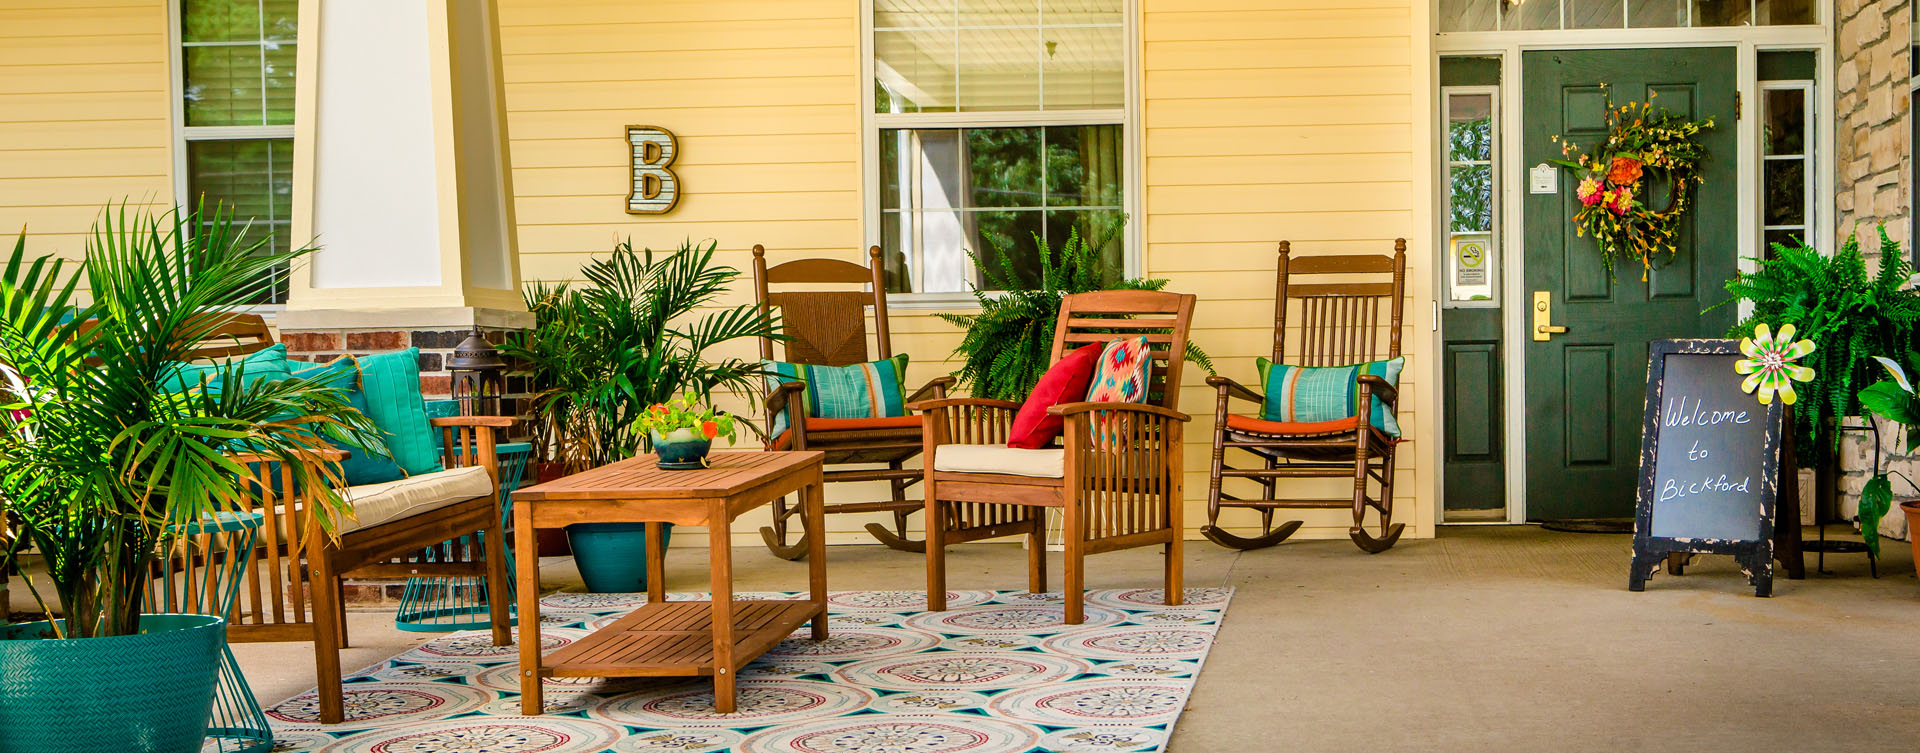 Enjoy conversations with friends on the porch at Bickford of Macomb